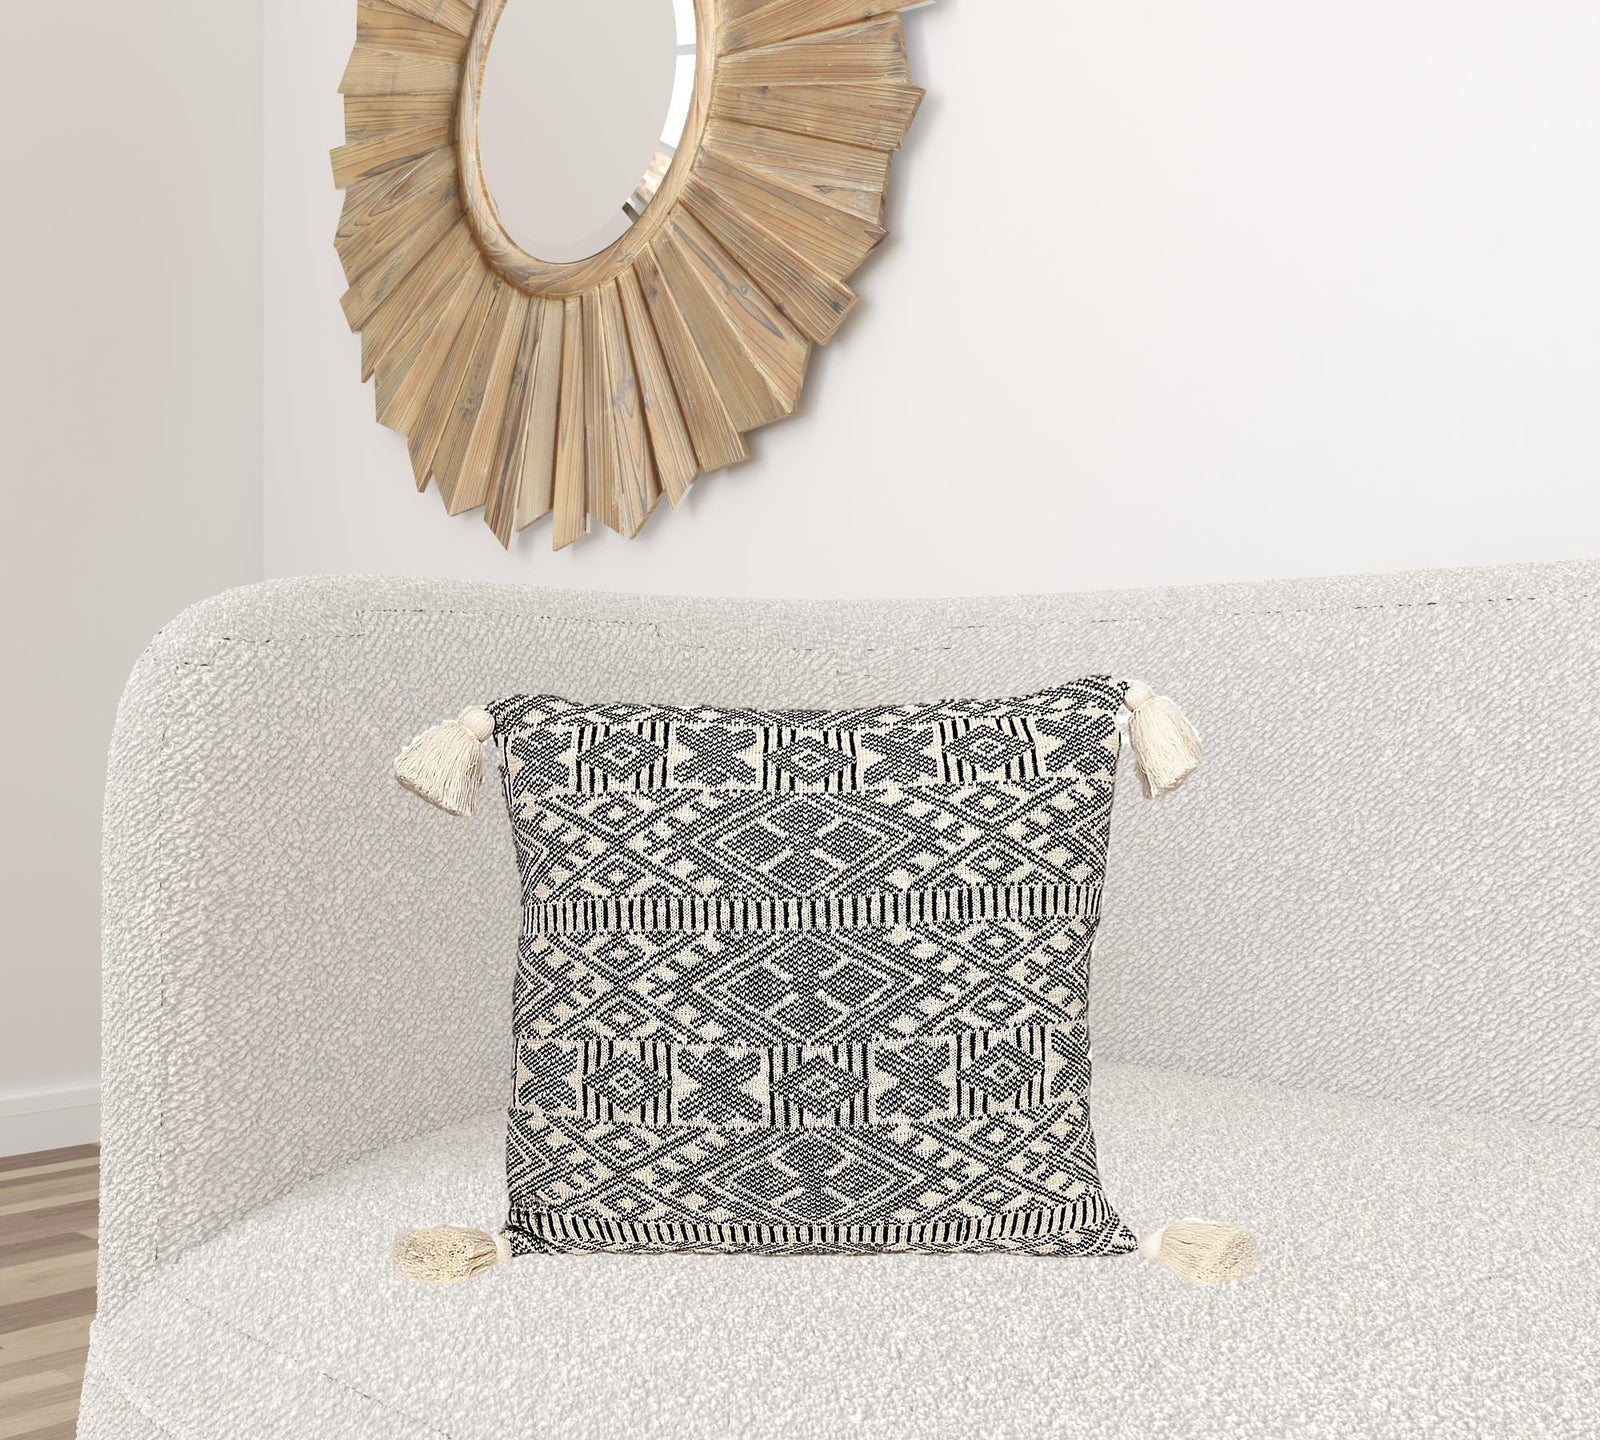 20" x 20" Black and Cream Bohemian Pattern Square Accent Throw Pillow with Tassel